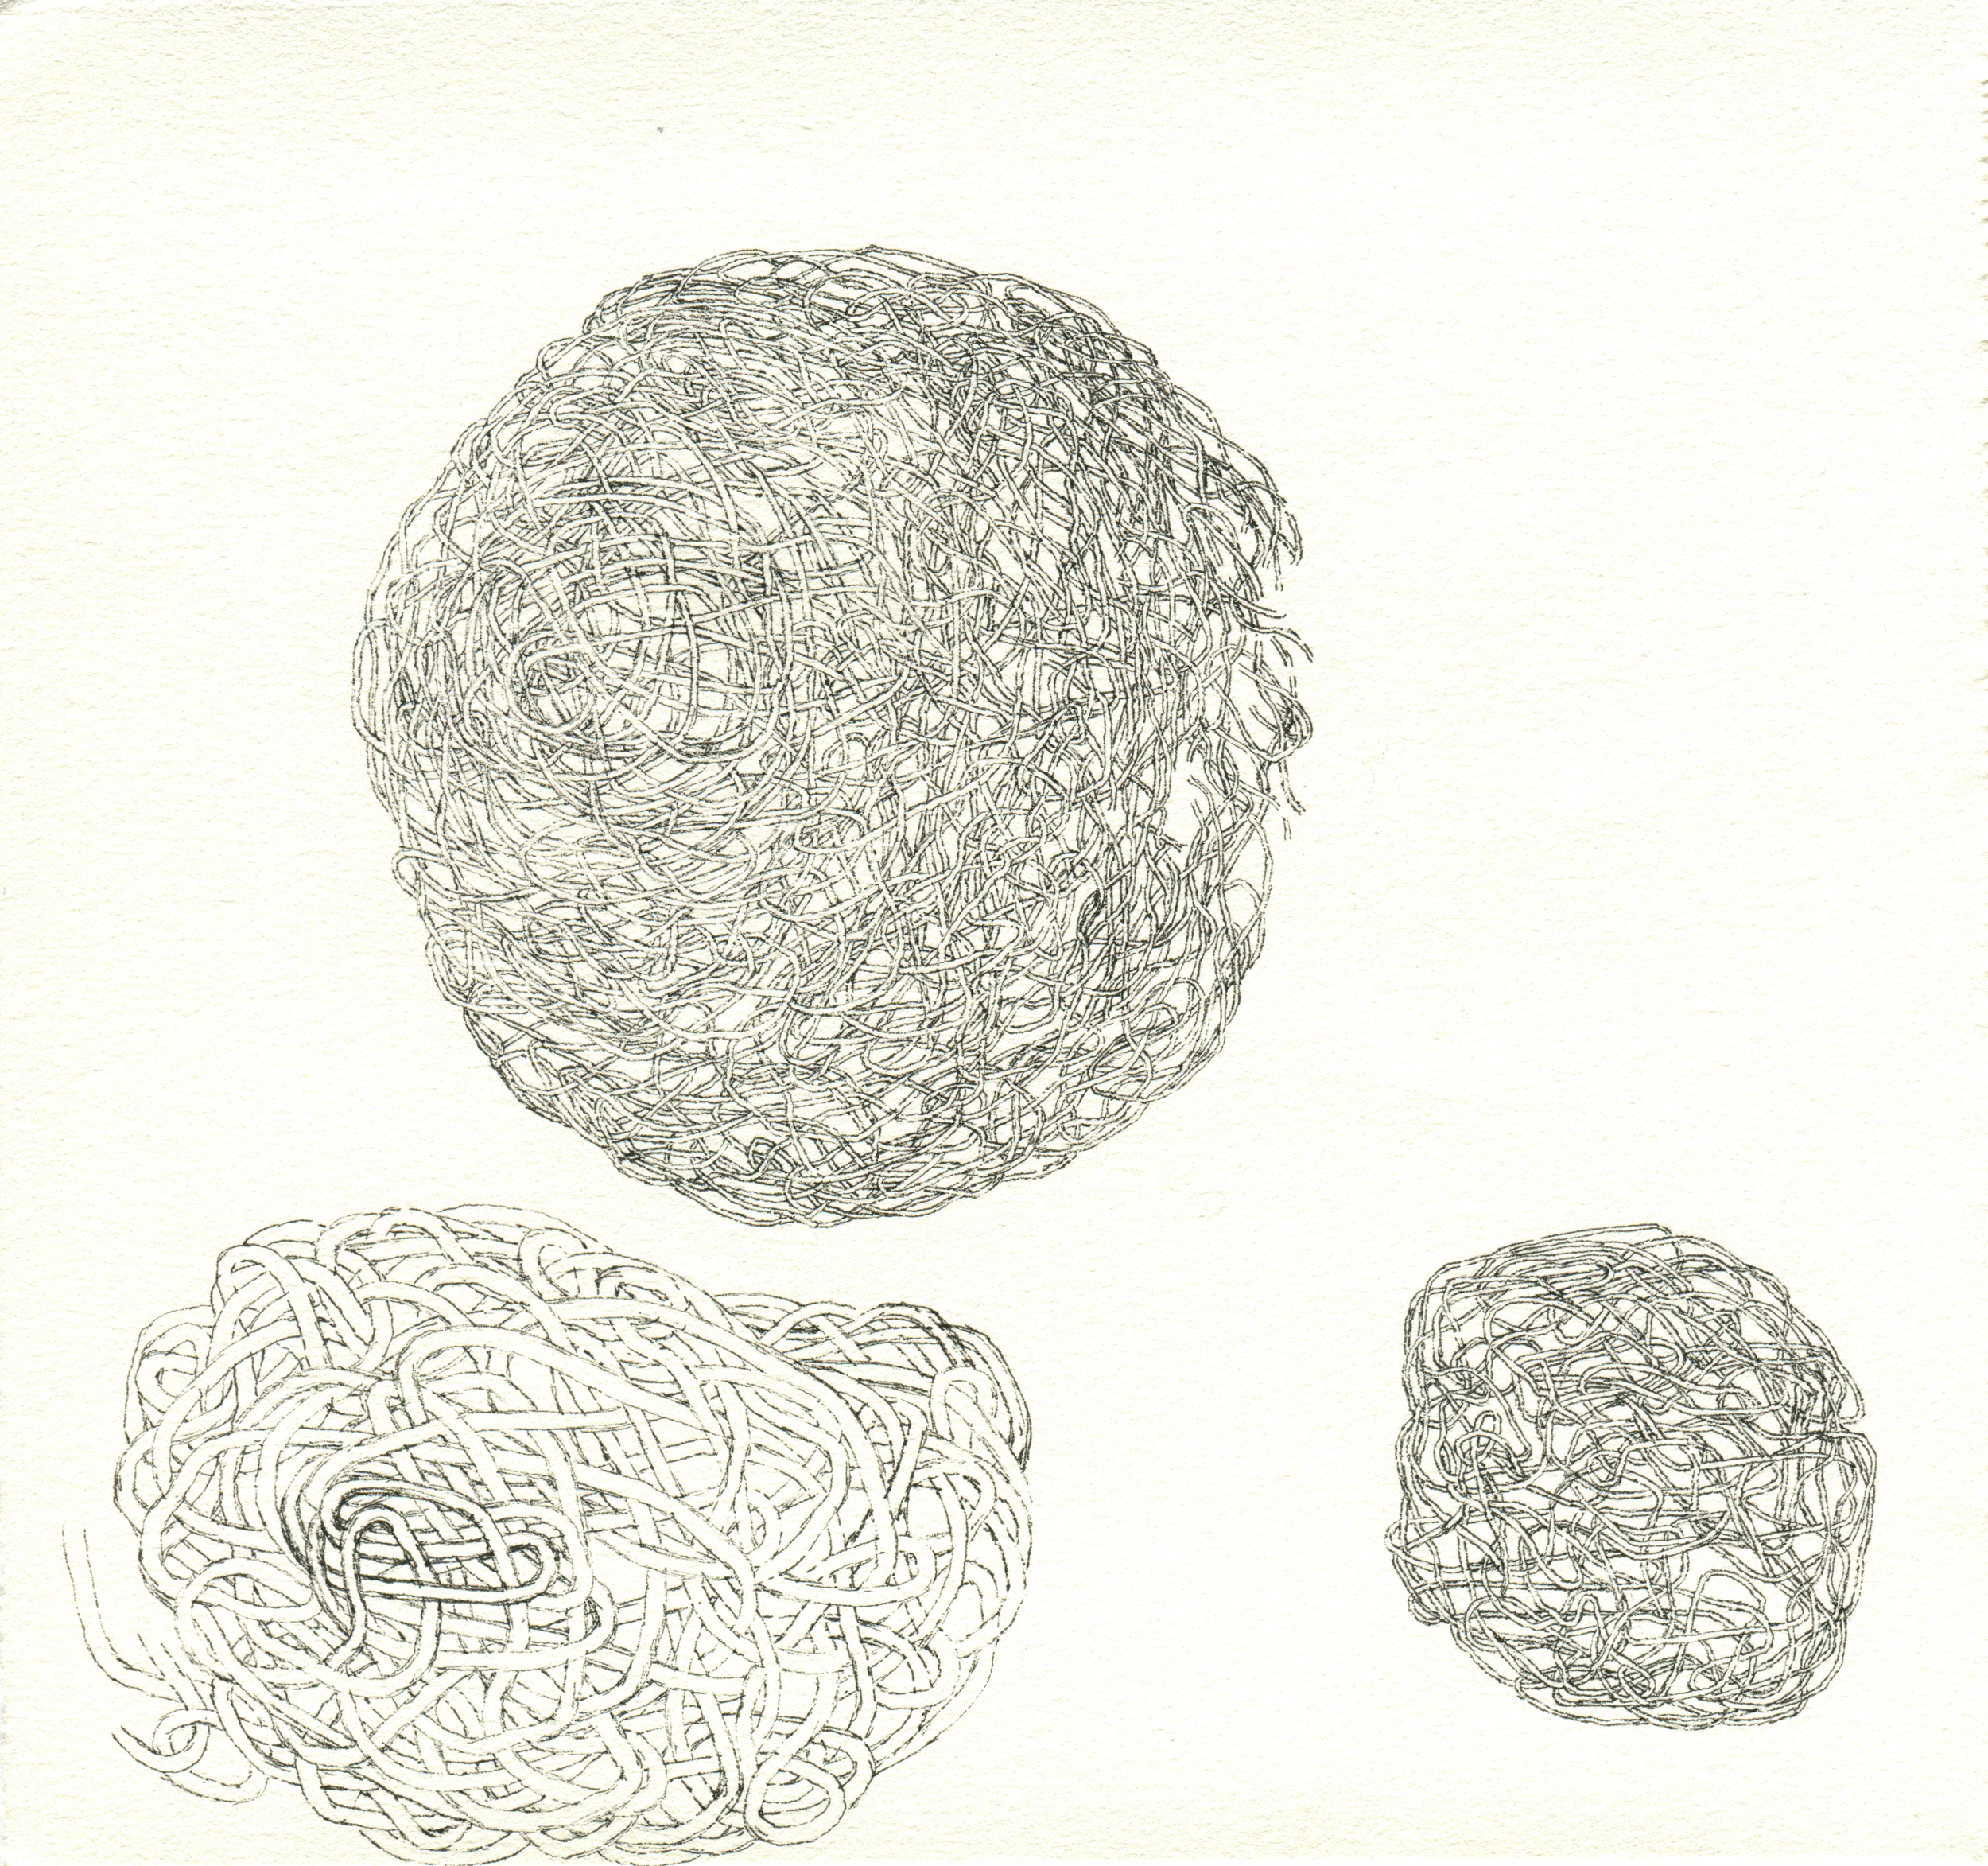  Untitled (Tangle Study VII), Micron on Paper 7 ⅛ x 7.5 in. 2018   